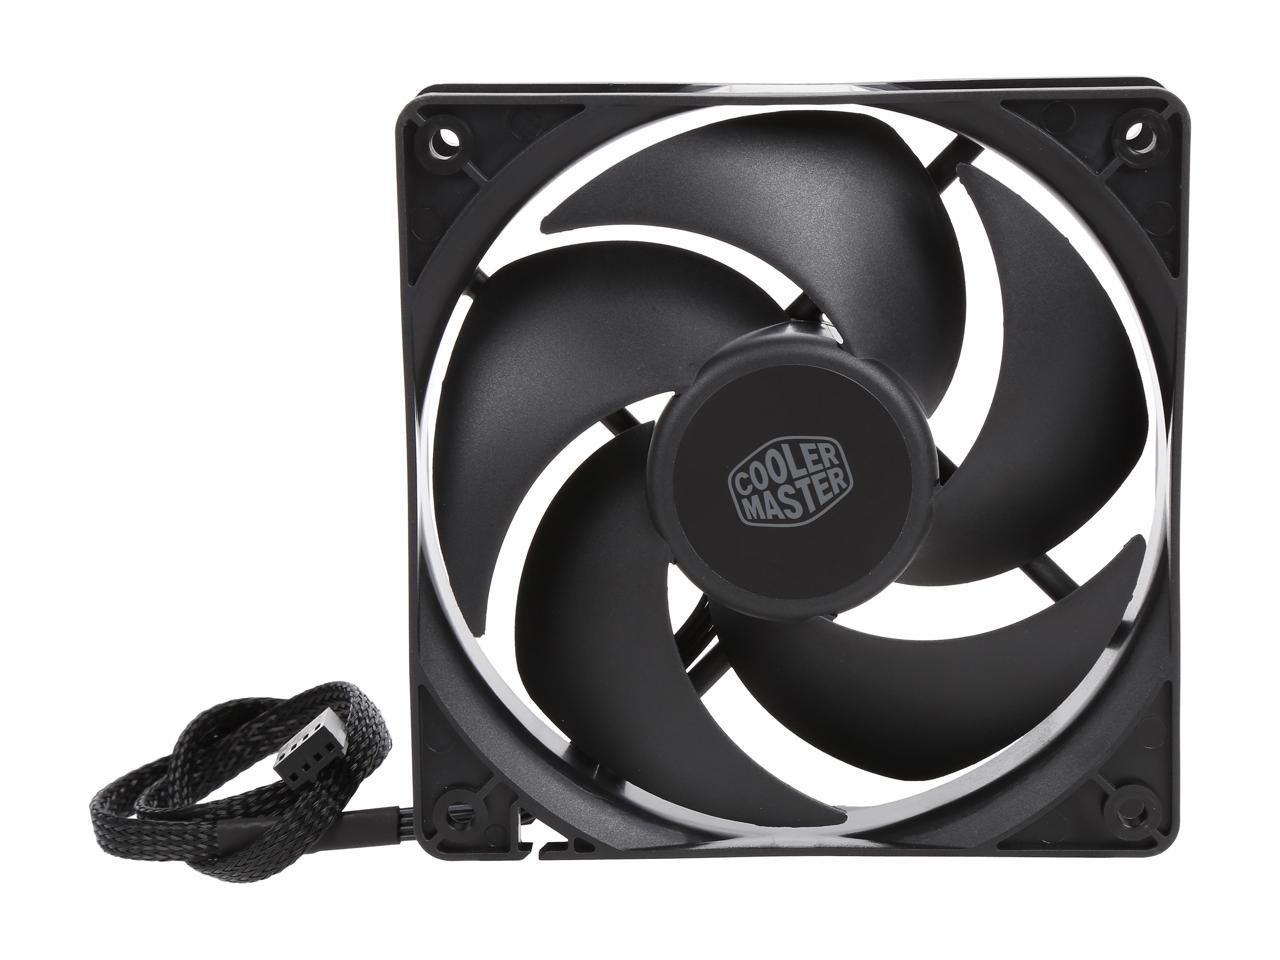 COOLER MASTER R4-SFNL-24PK-R1 Silencio FP120 PWM 2400 RPM, latest in  whisper-quiet cooling performance